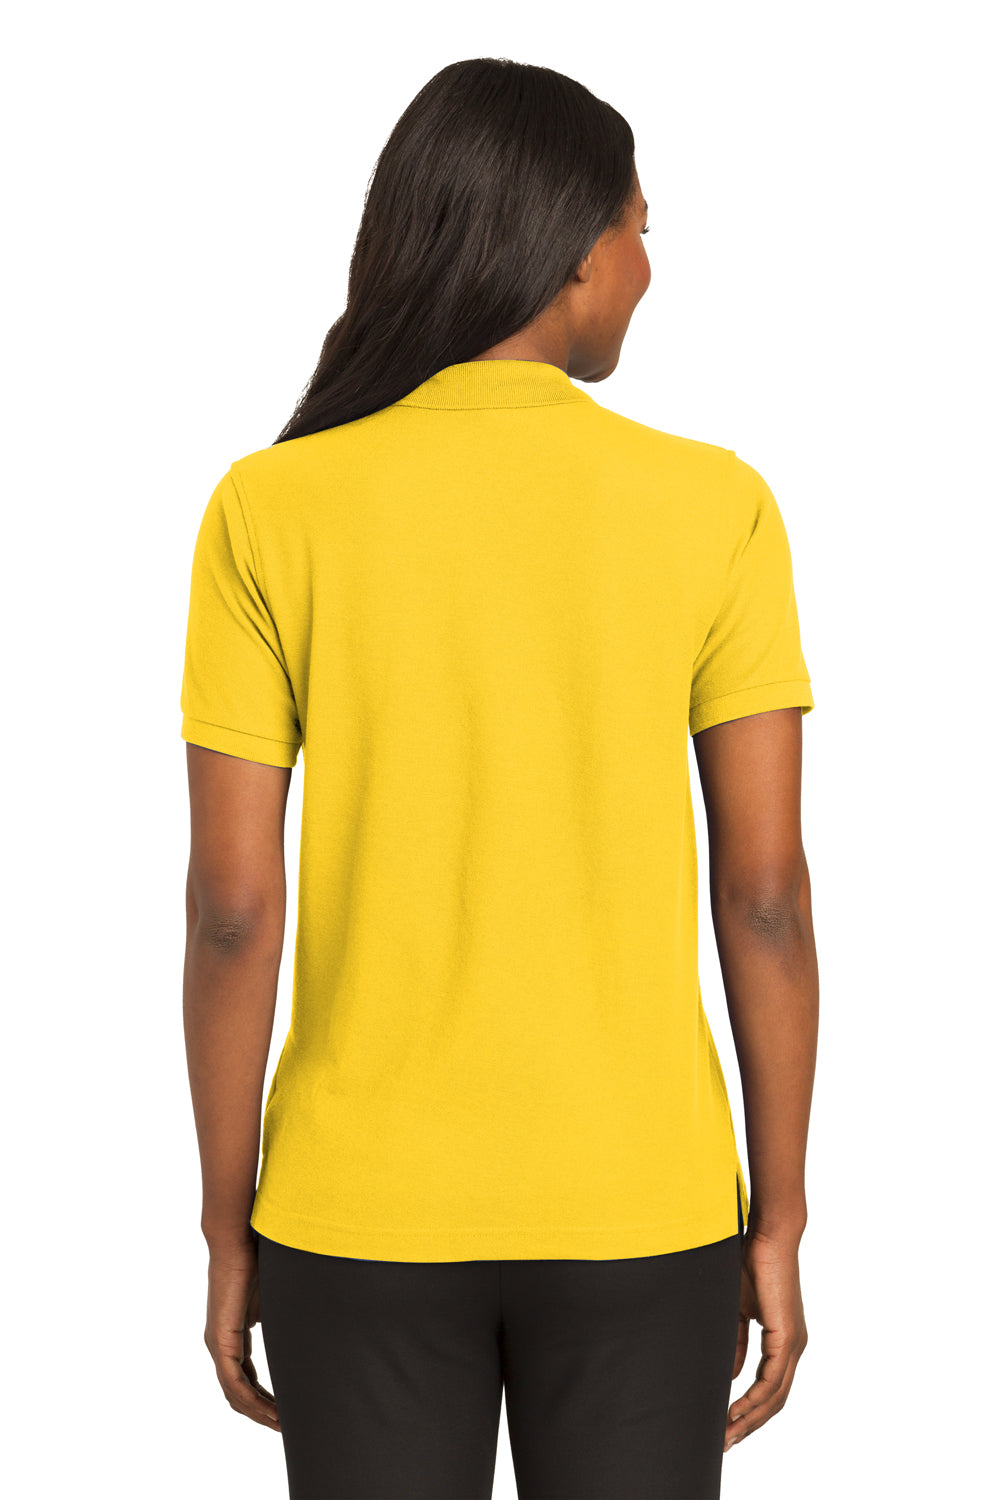 Port Authority L500 Womens Silk Touch Wrinkle Resistant Short Sleeve Polo Shirt Sunflower Yellow Back